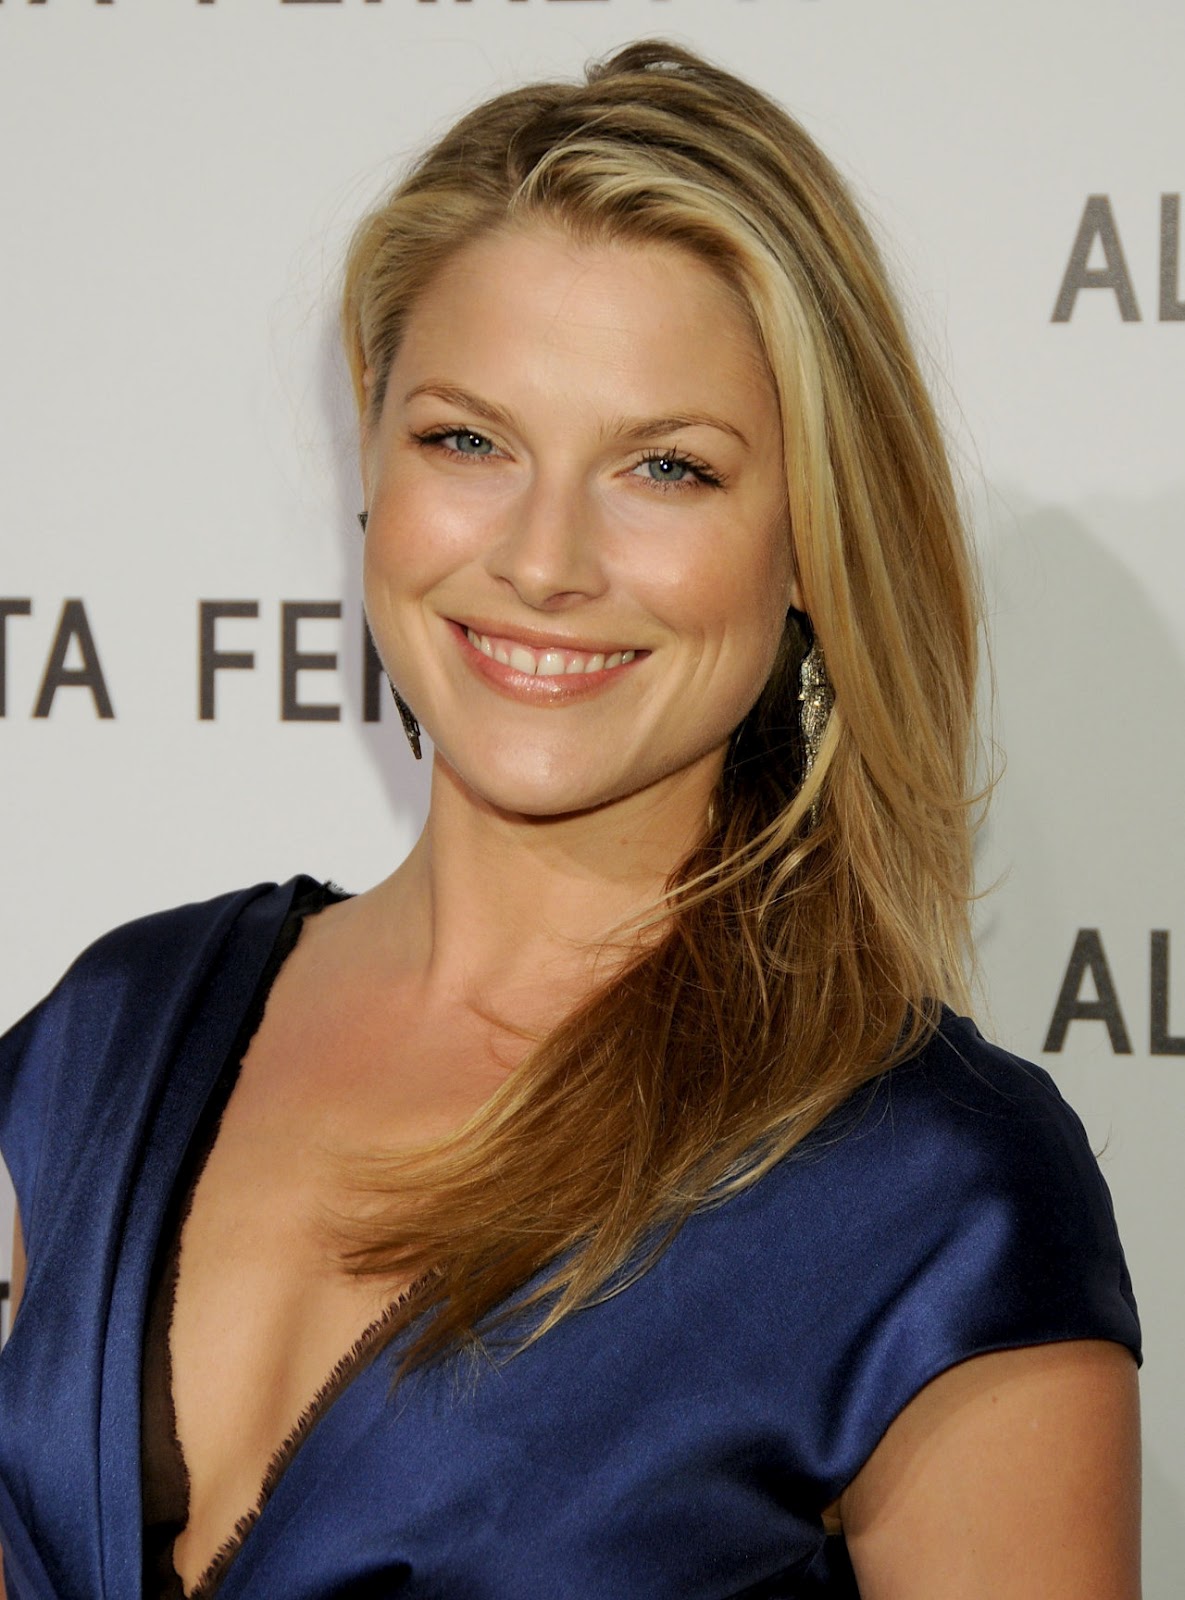 ALL ABOUT HOLLYWOOD STARS: Ali Larter Profile and Pics1185 x 1600